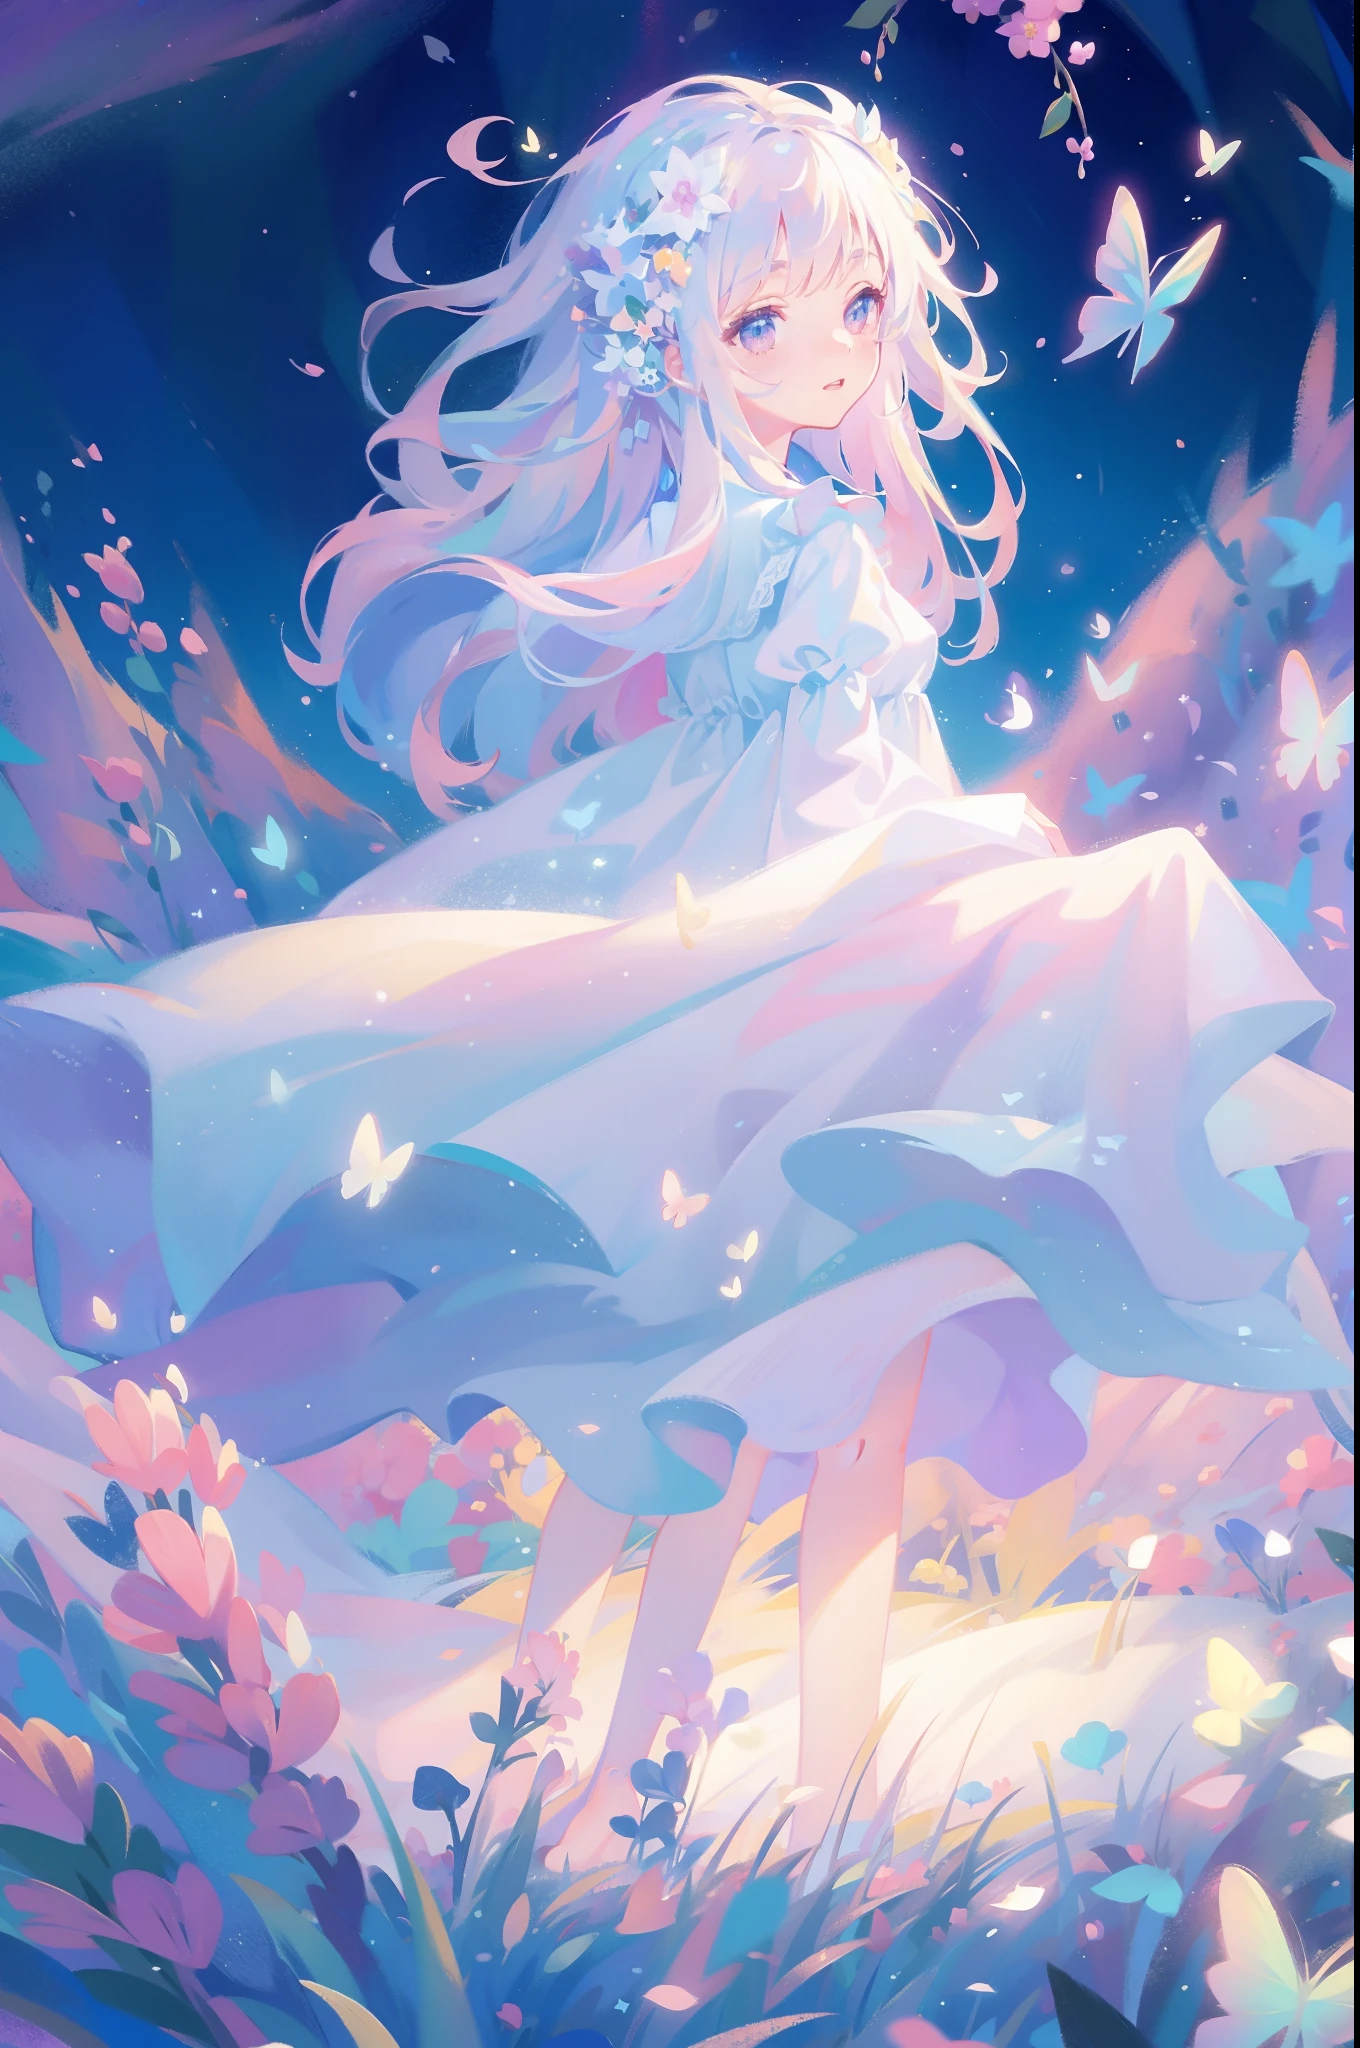 masterpiece, 8k, sharp focus, high resolution, princess, beautiful girl, fantasy white dress, dreamy, pastel colors, beautiful, peaceful, calm, fantasy landscape, beautiful dress design, intricate dress detail, (fantasia background), otherworldly flowers and butterflies, glowing stars